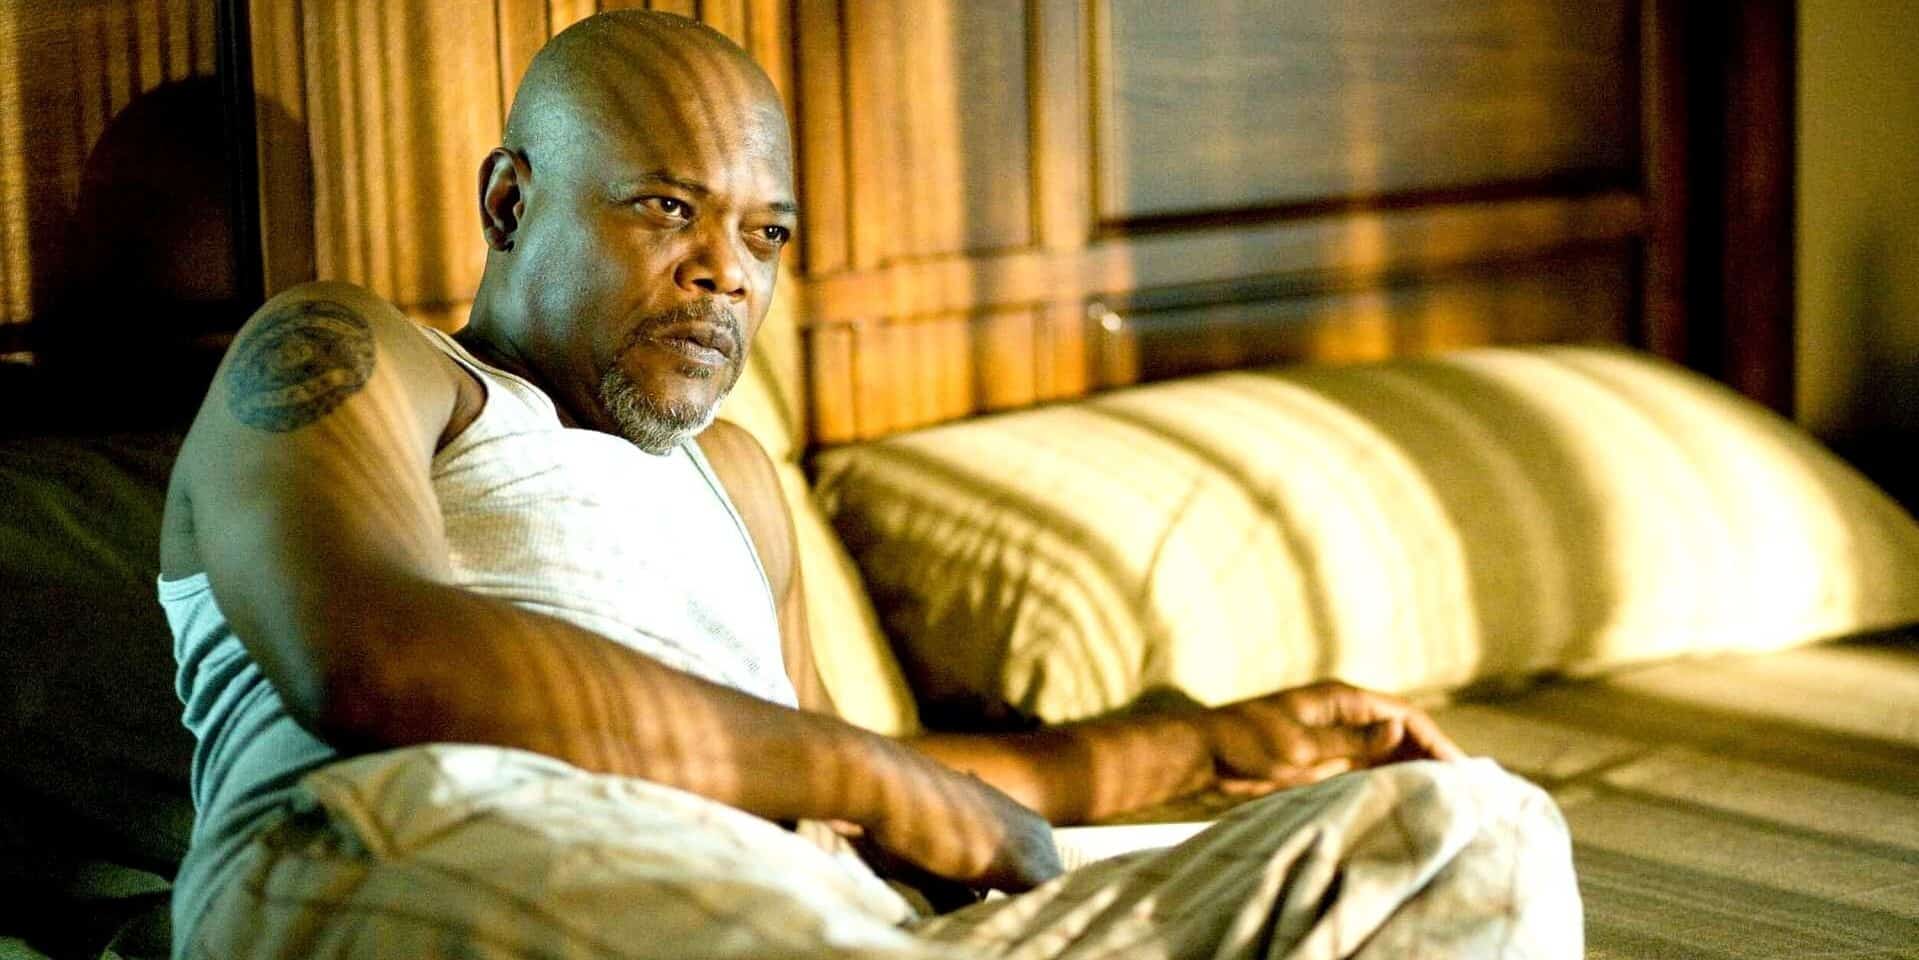 Samuel L. Jackson flips through the TV with a remote in this image from Screen Gems.